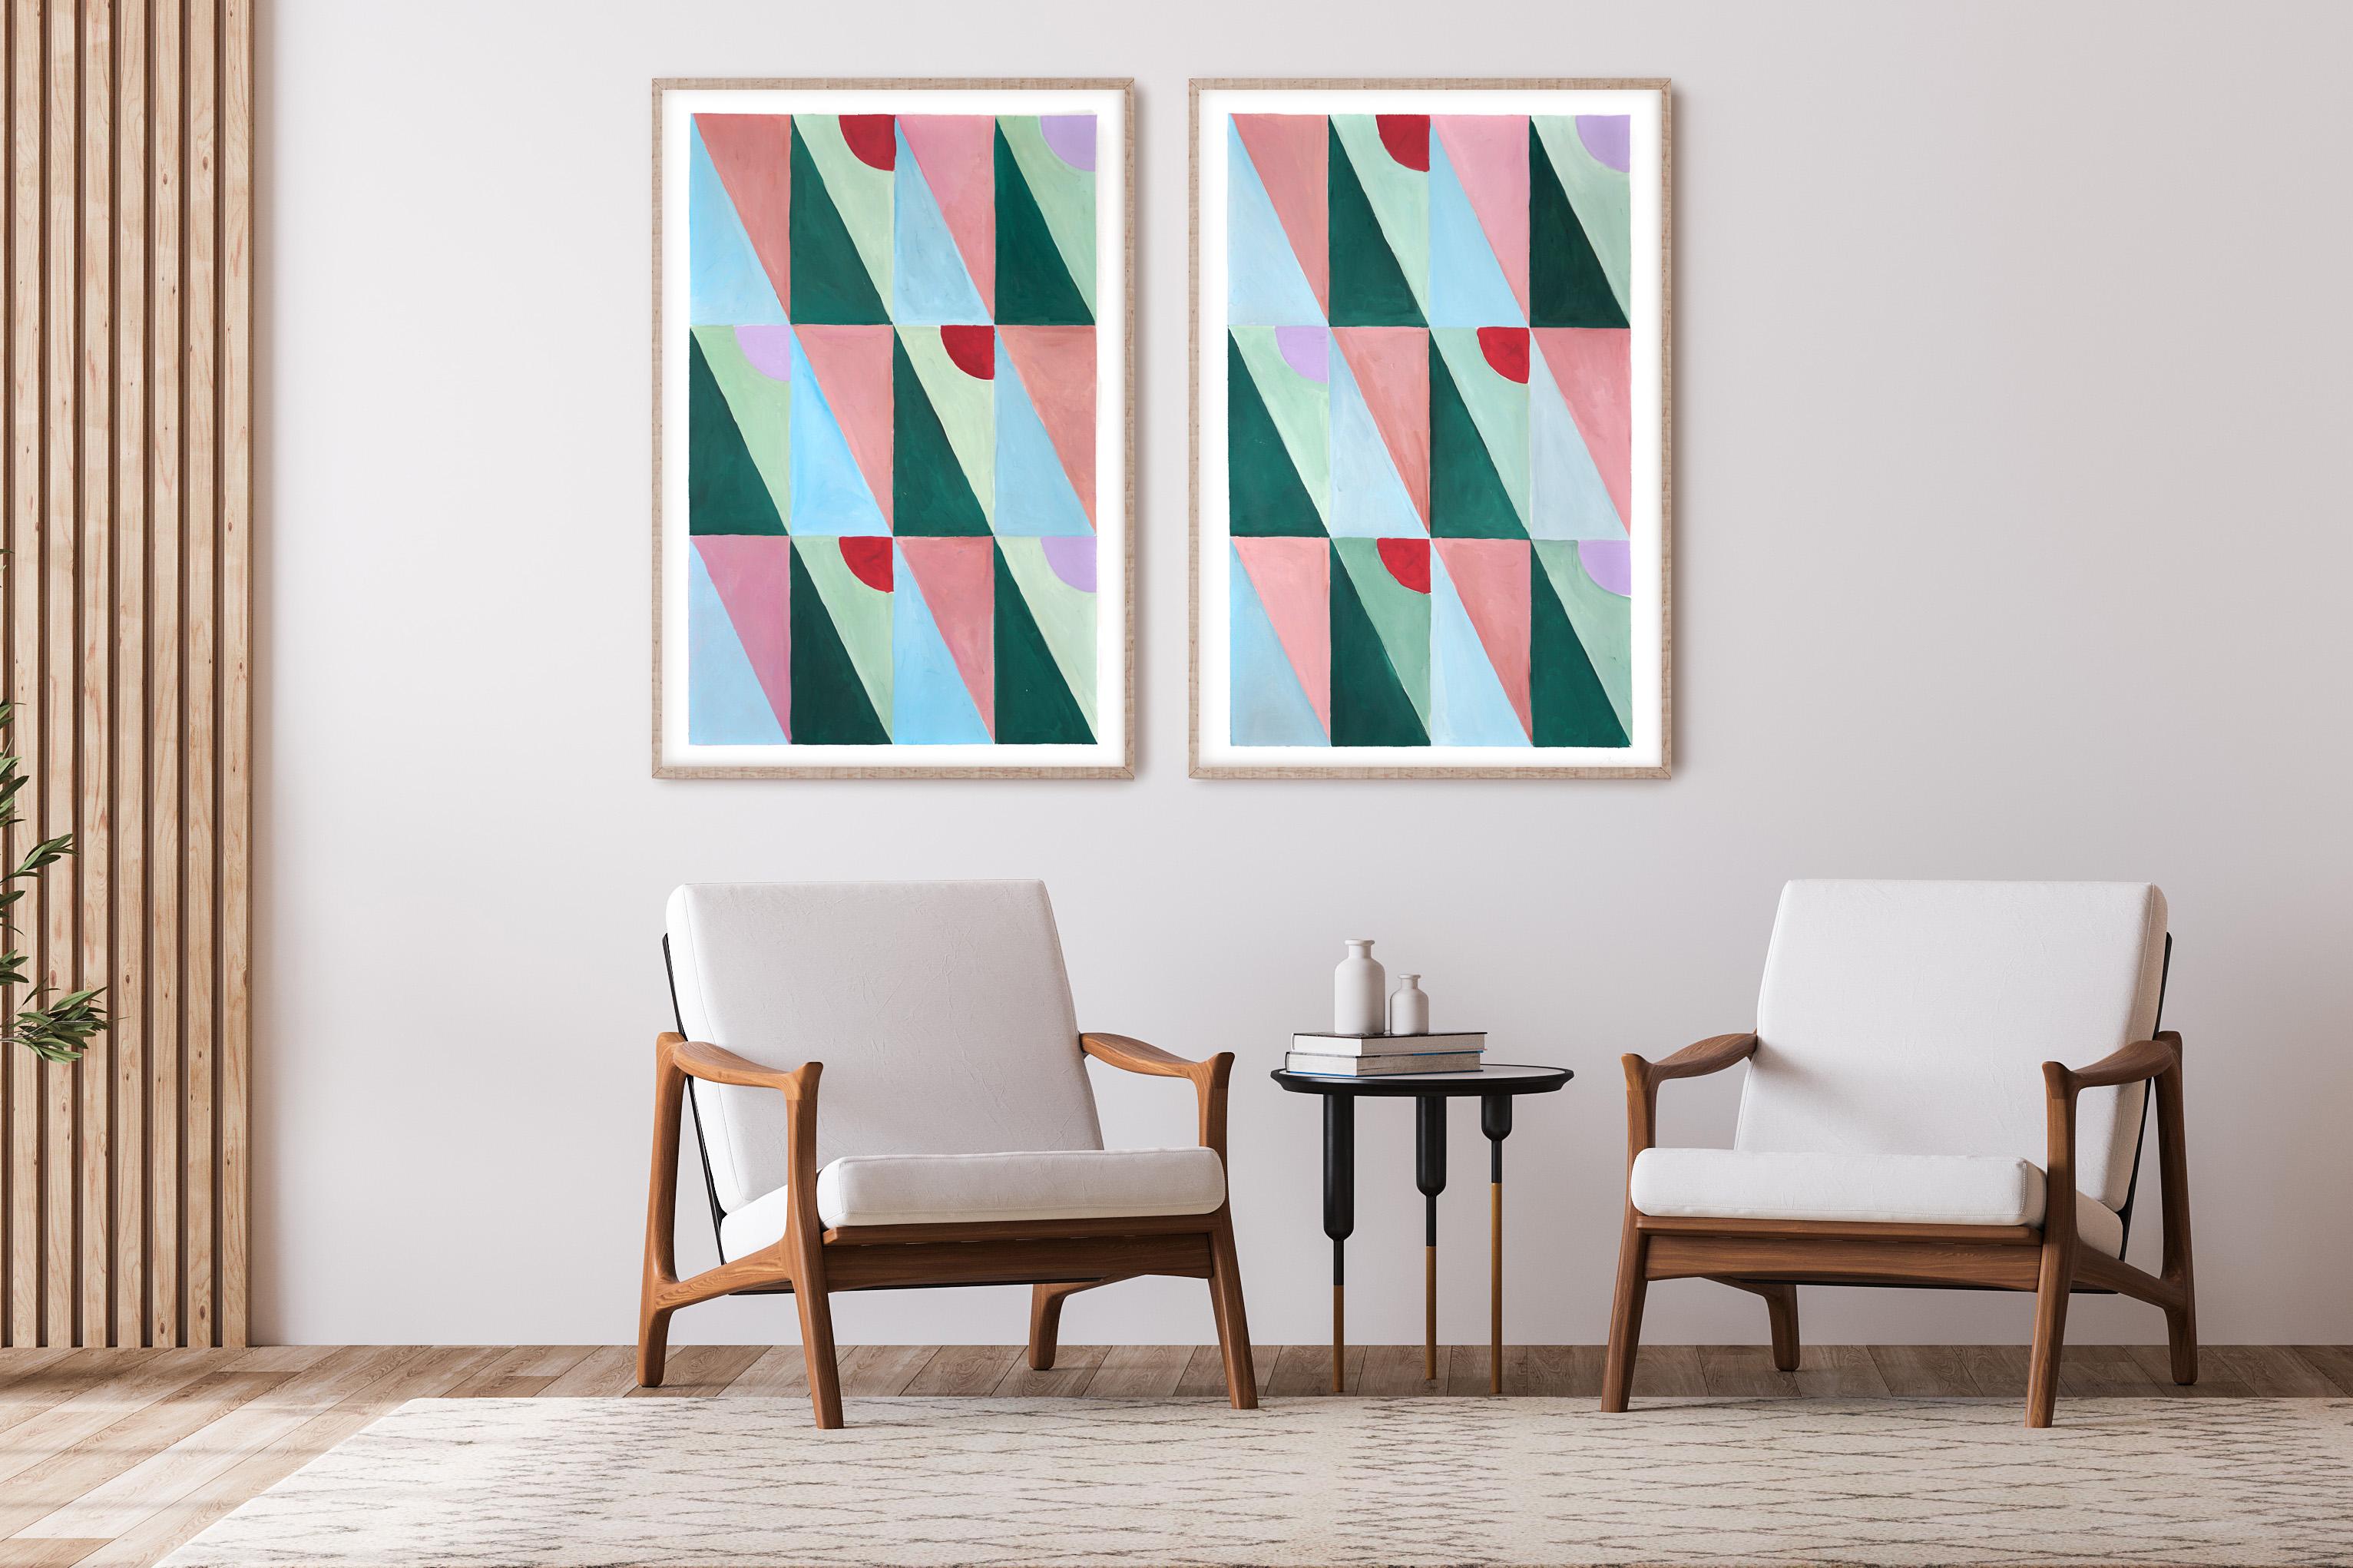 Pastel Tiles Combo Grid, Triangle Tiles Pattern Diptych, Pink and Green Bauhaus  - Painting by Natalia Roman